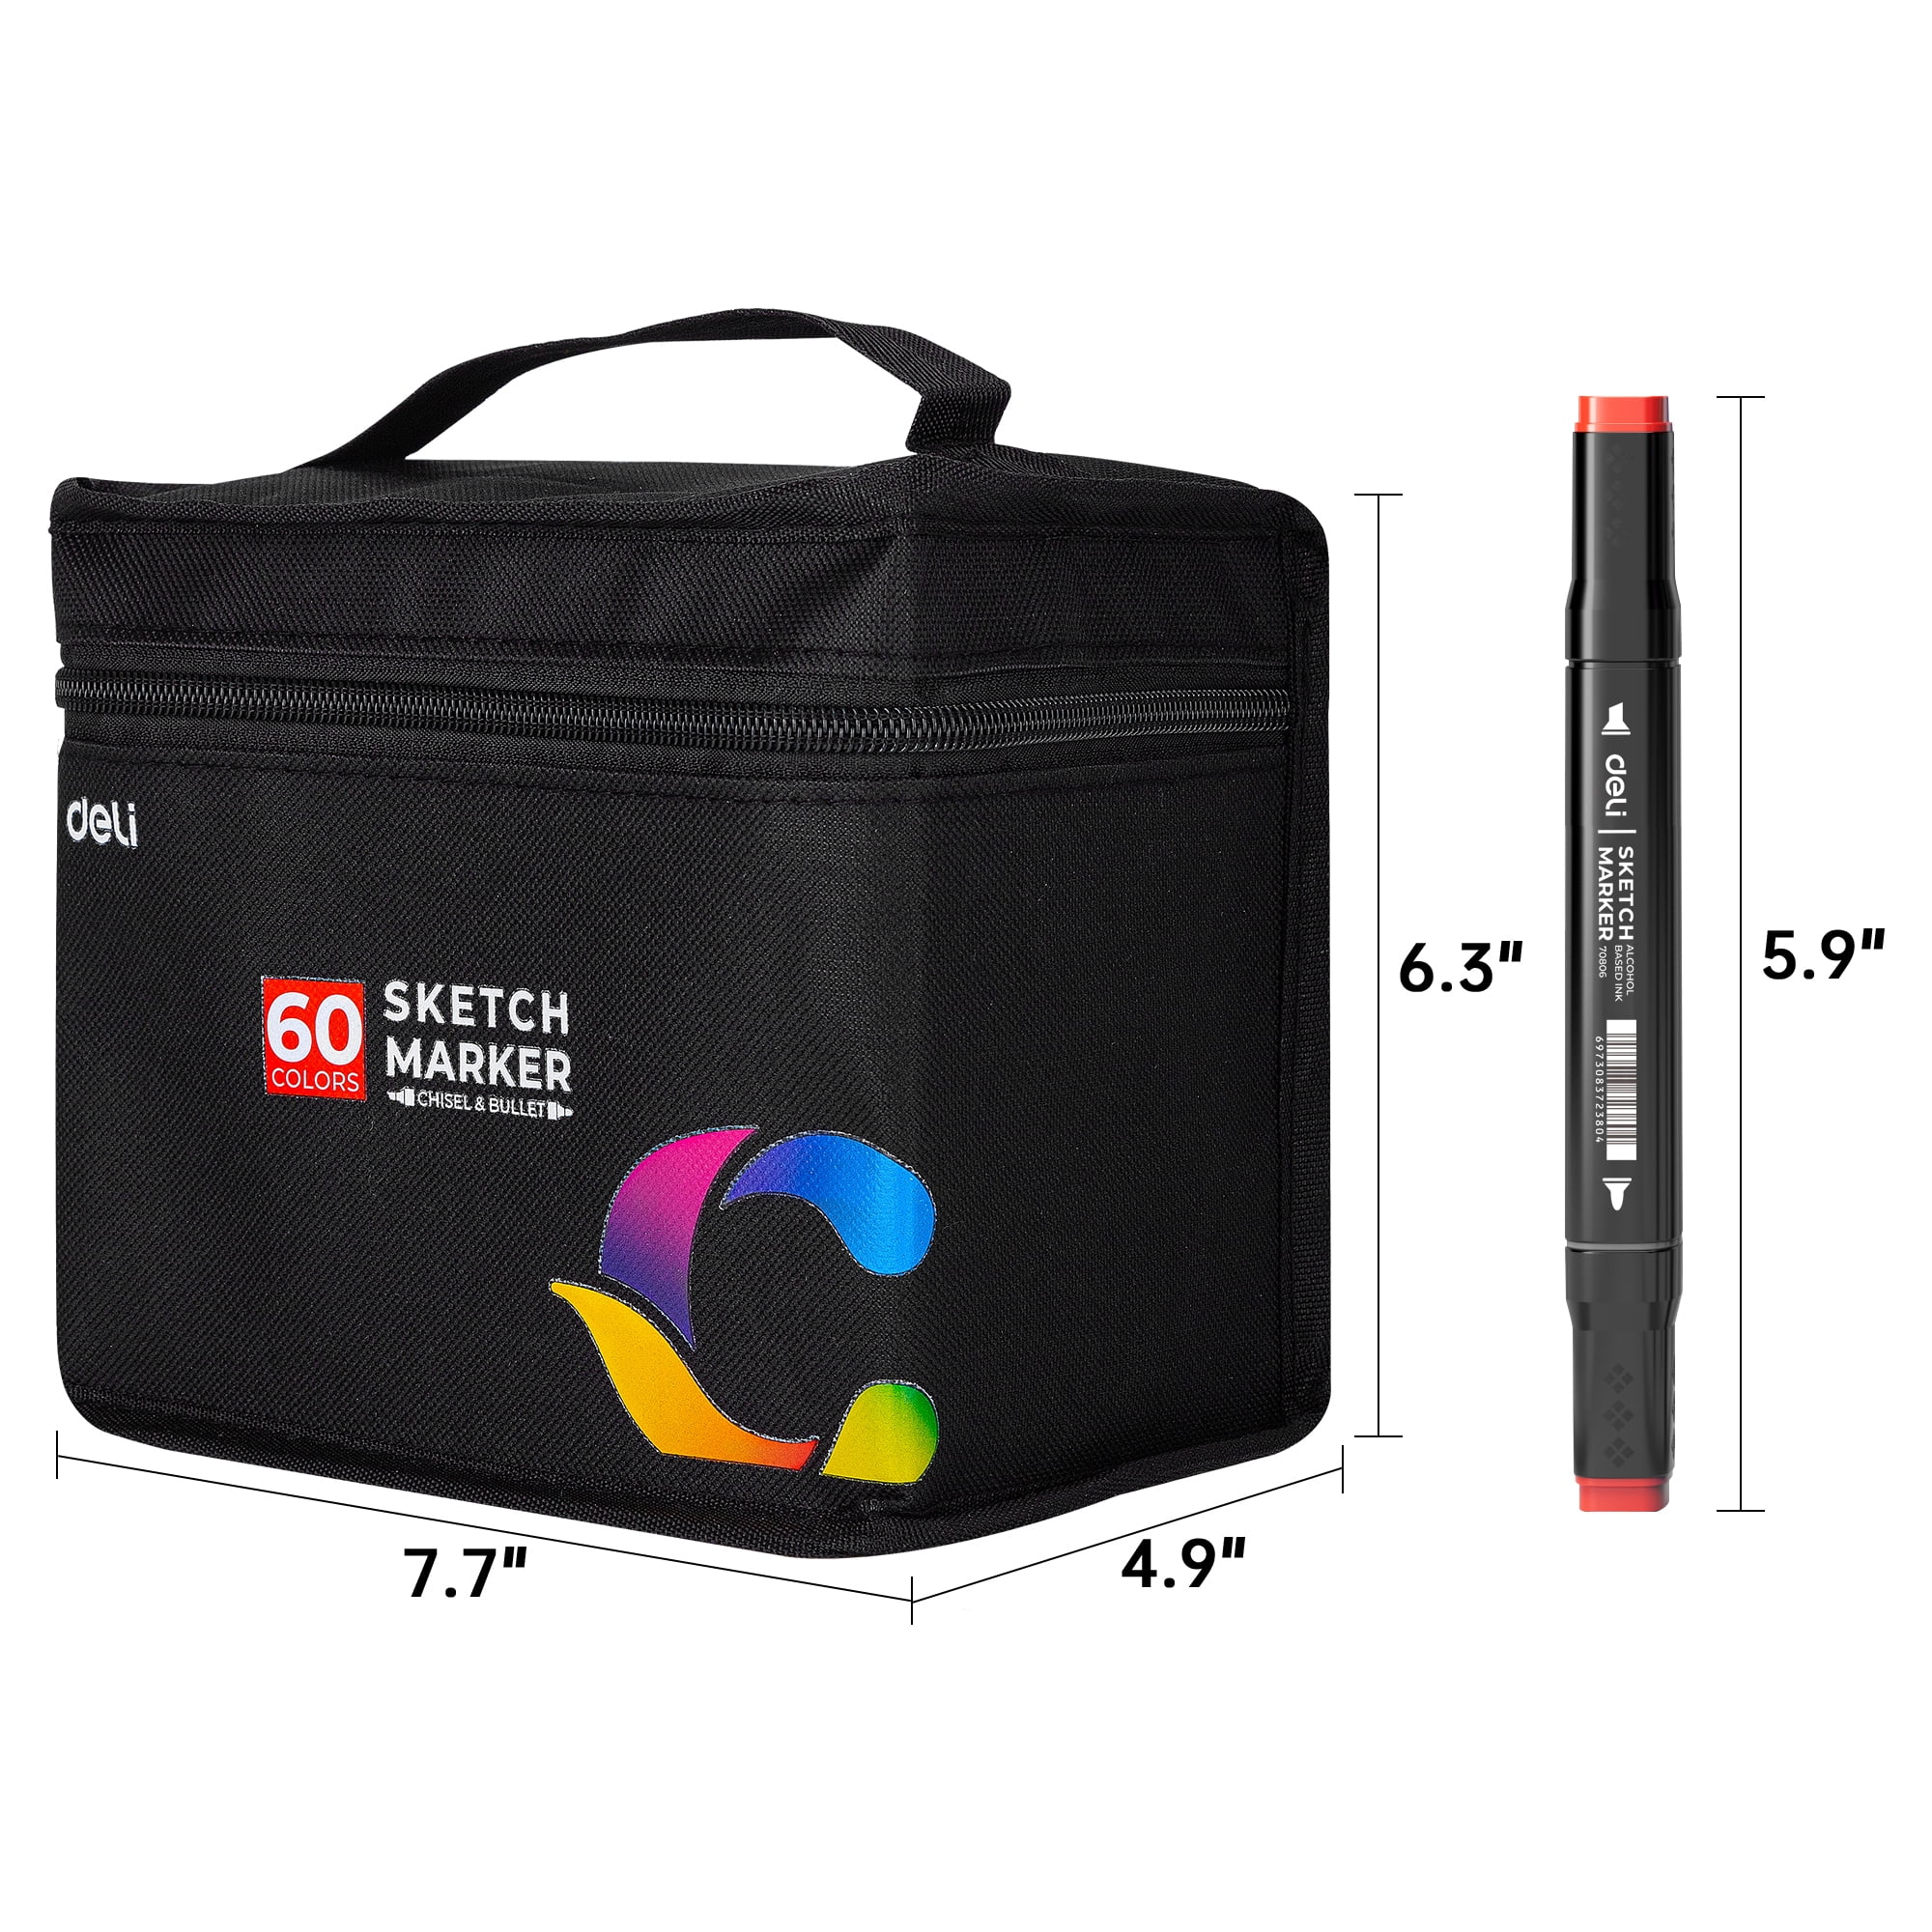 3 bags with 80 double-sided colored markers/pencils in each bag